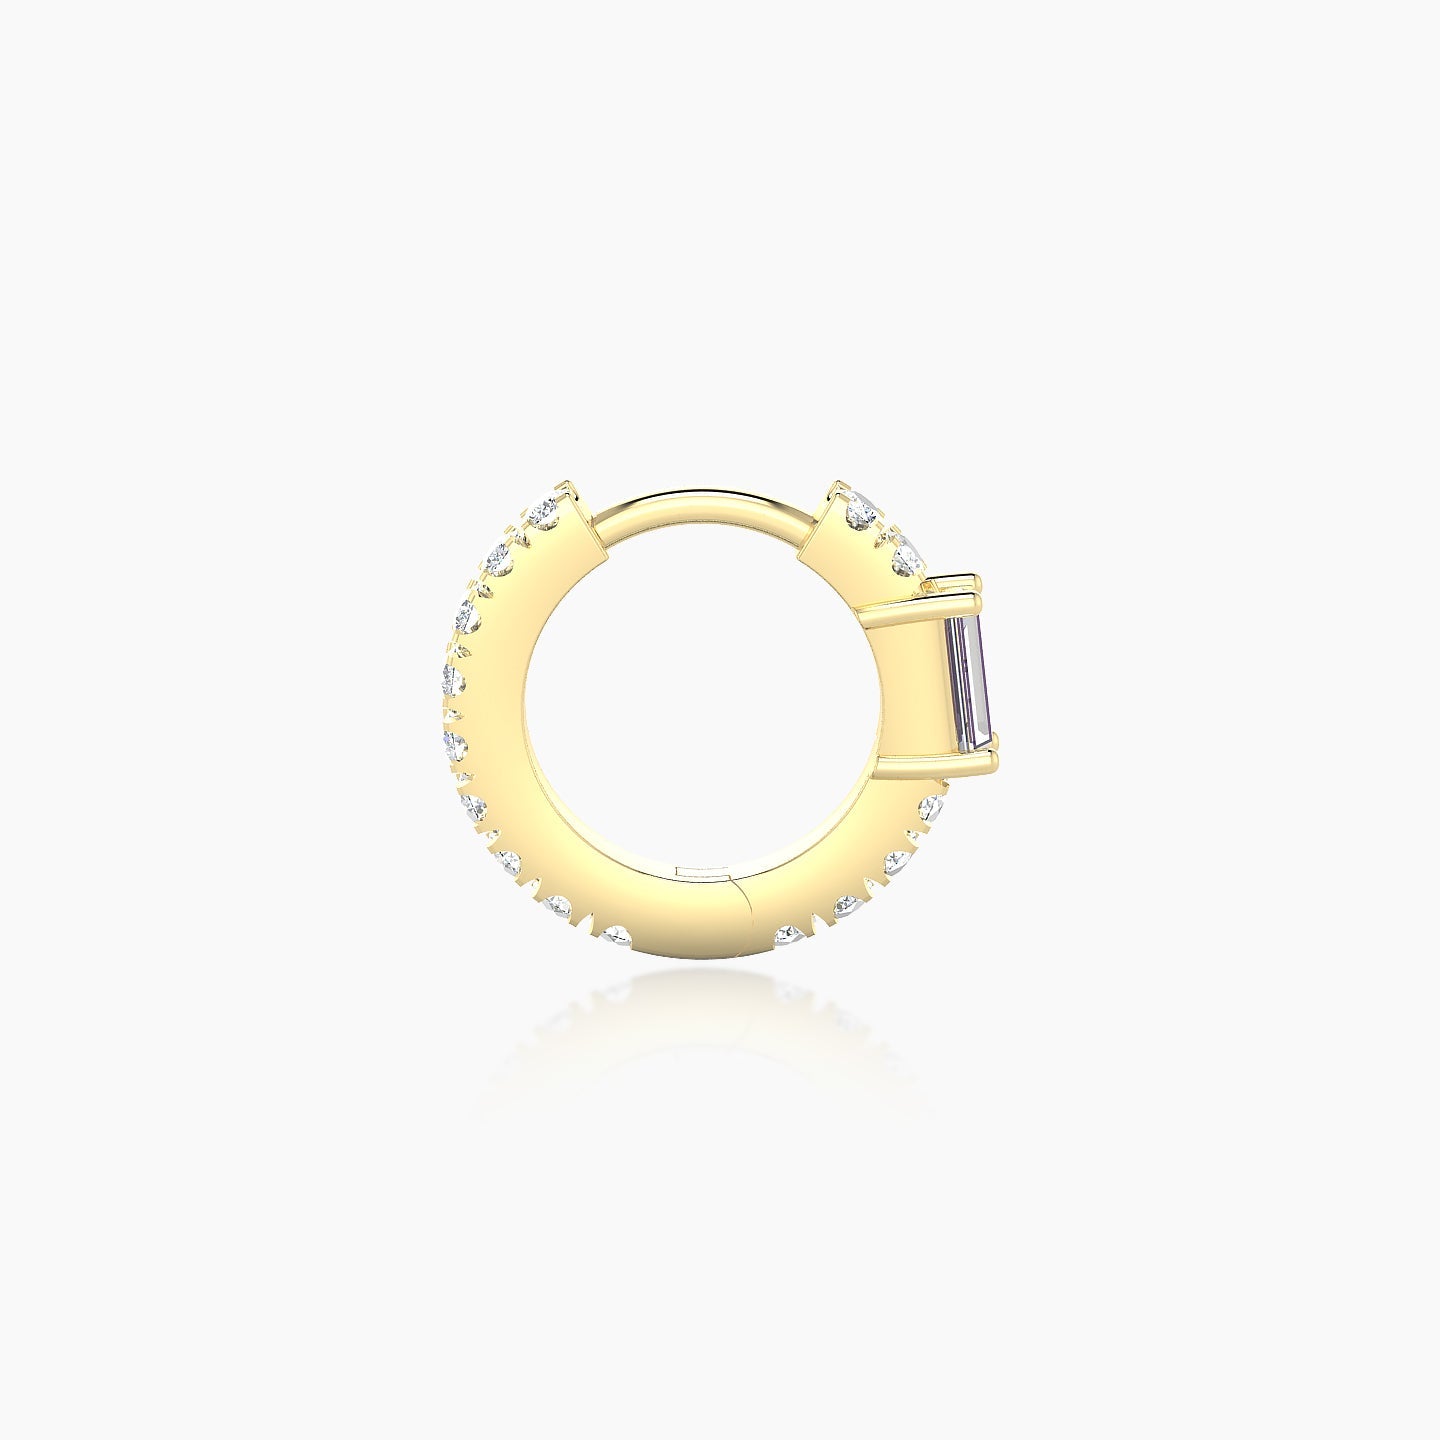 Inanna | 18k Yellow Gold 6.5 mm Baguette Diamond Nose Ring Piercing